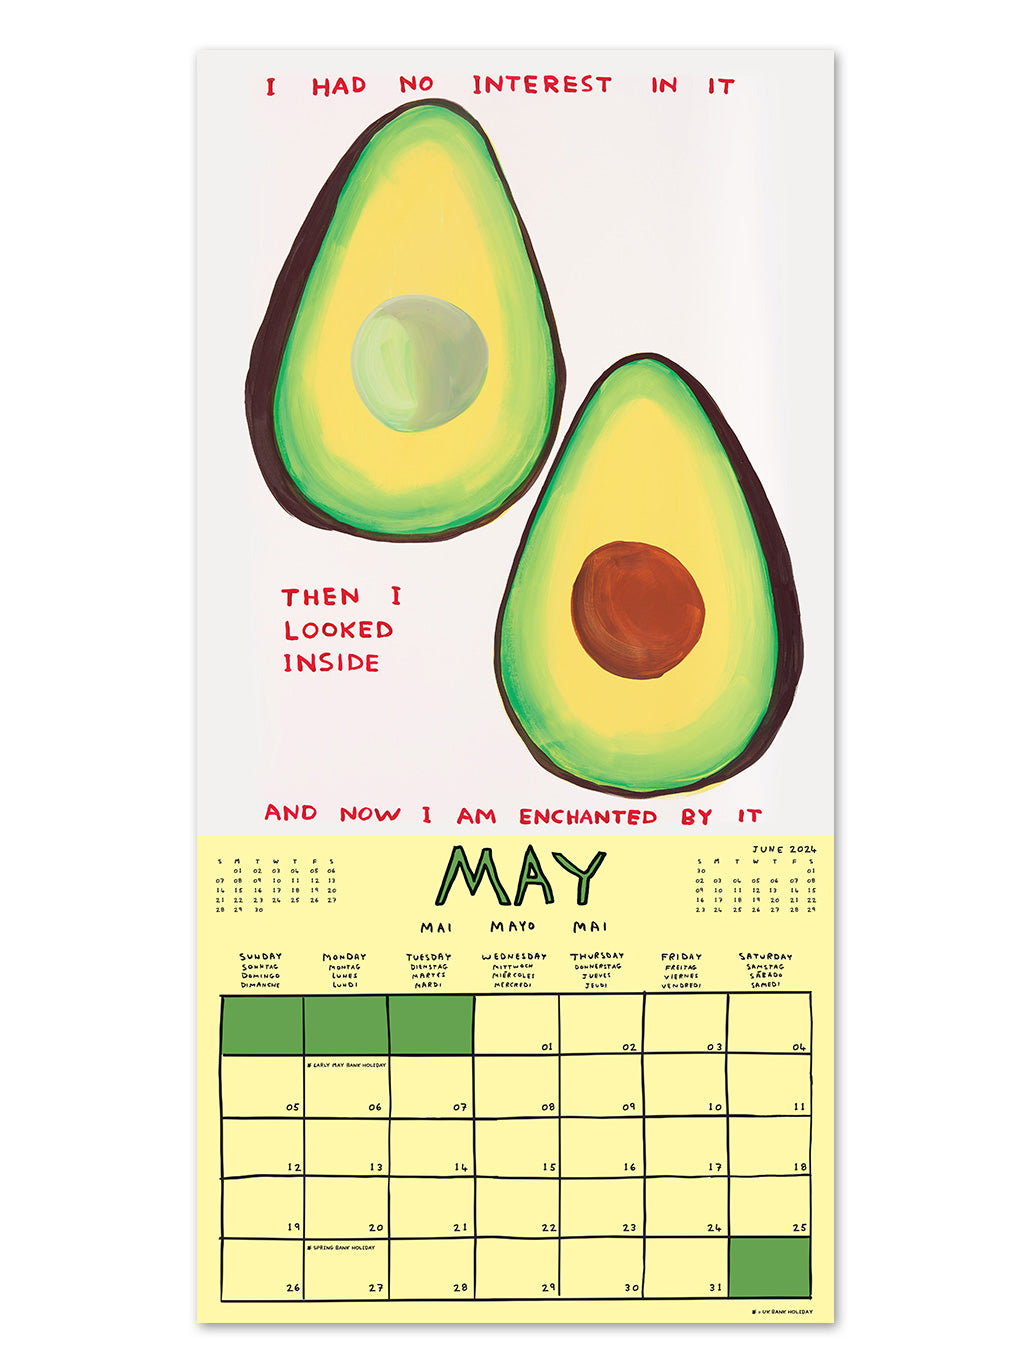 An example of the layout of a 2024 calendar by artist David Shrigley. May shows a light yellow calendar section with a box allocated to each day of the month. The artwork on the top half of the page has a white background and shows an avocado cut in half with the words - I had no interest in it, then I looked inside and now I am enchanted by it.